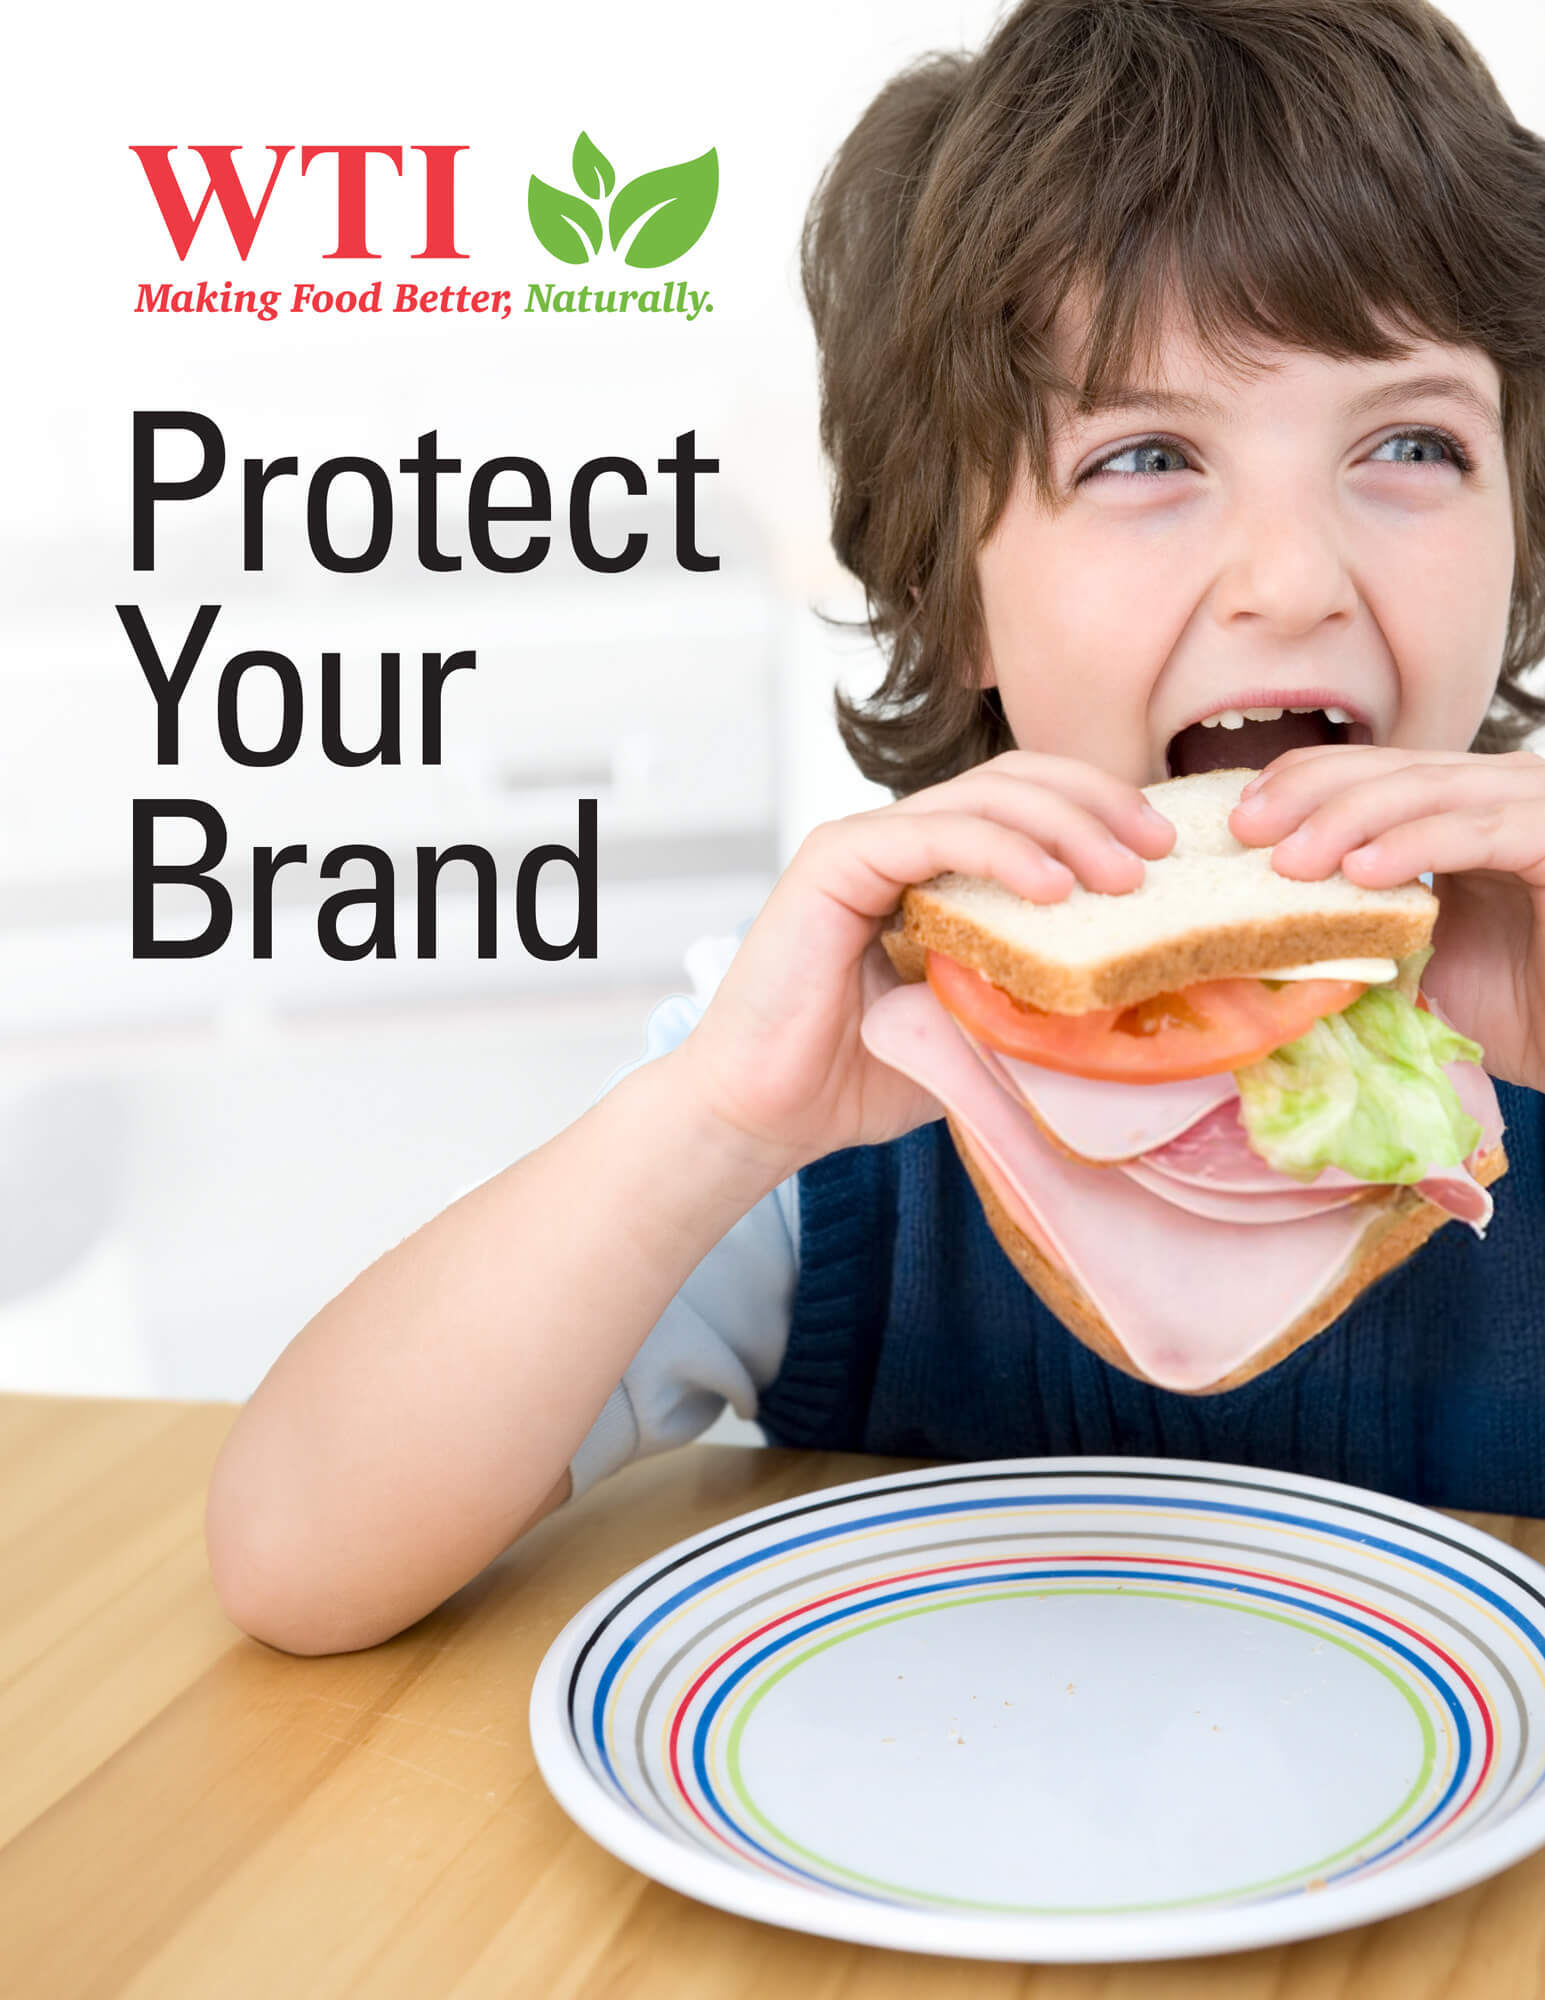 WTI, Protect Your Brand